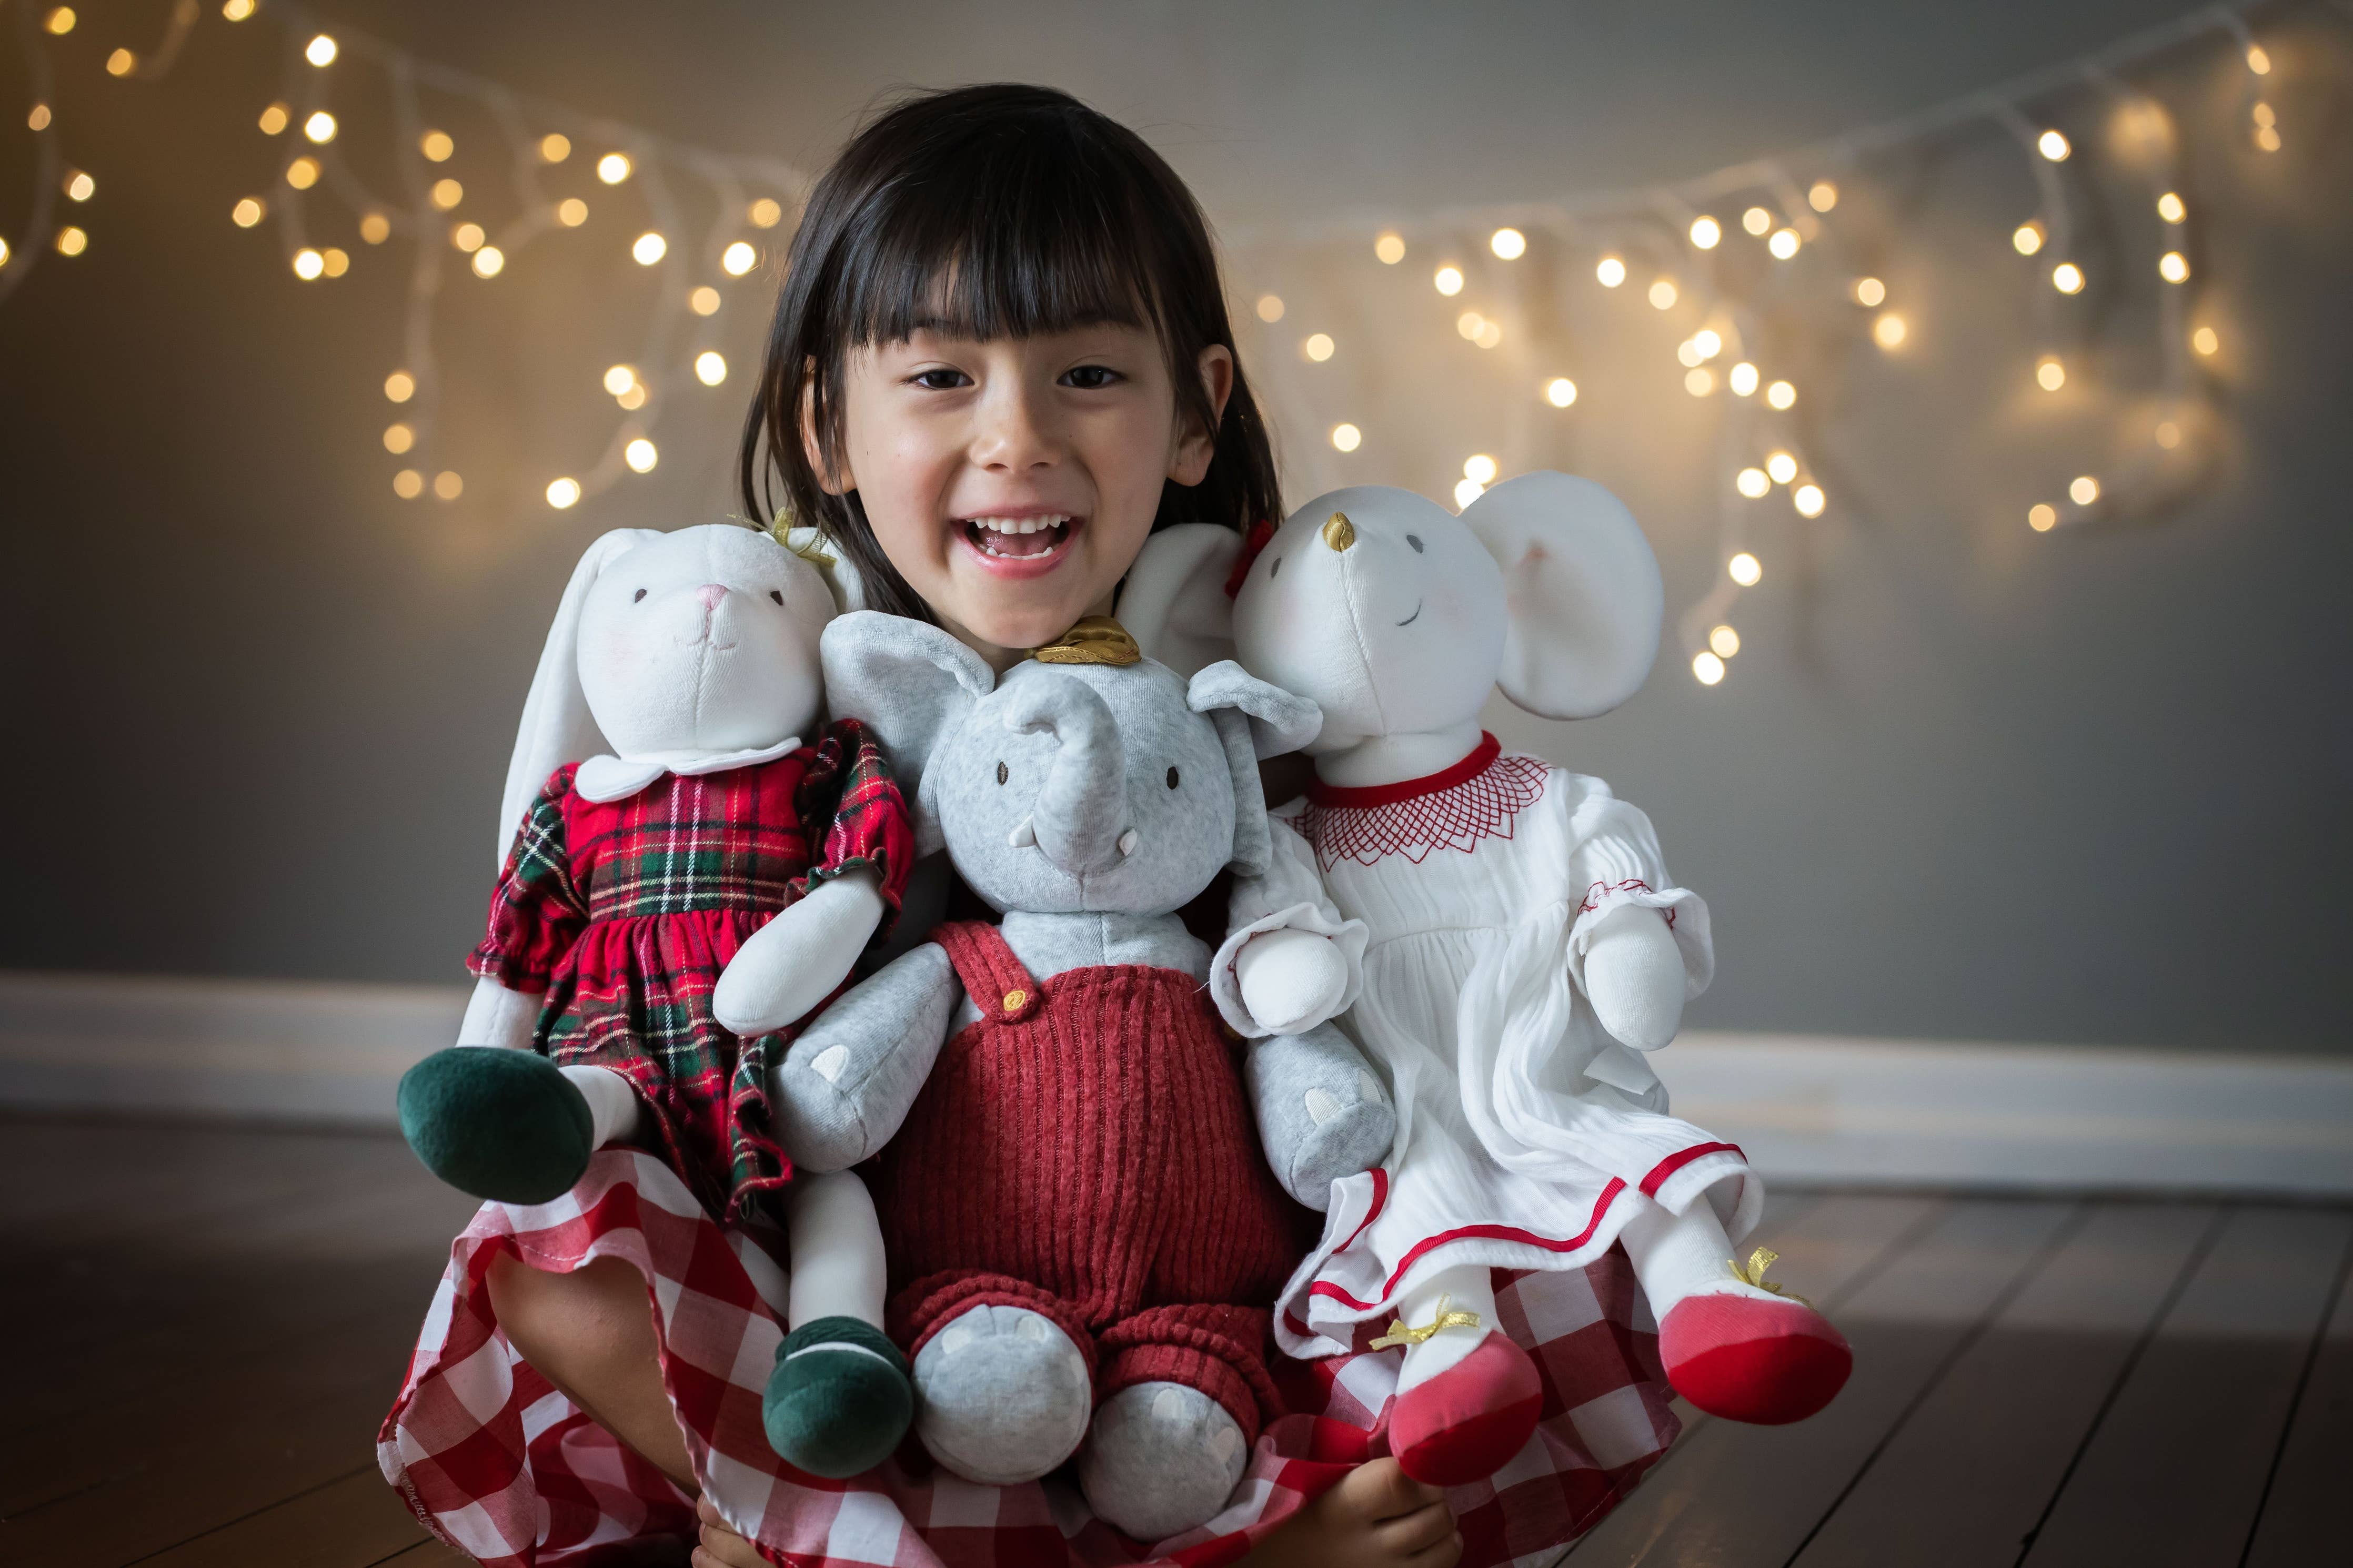 Havah the Bunny in Holiday Plaid Dress - Clearance